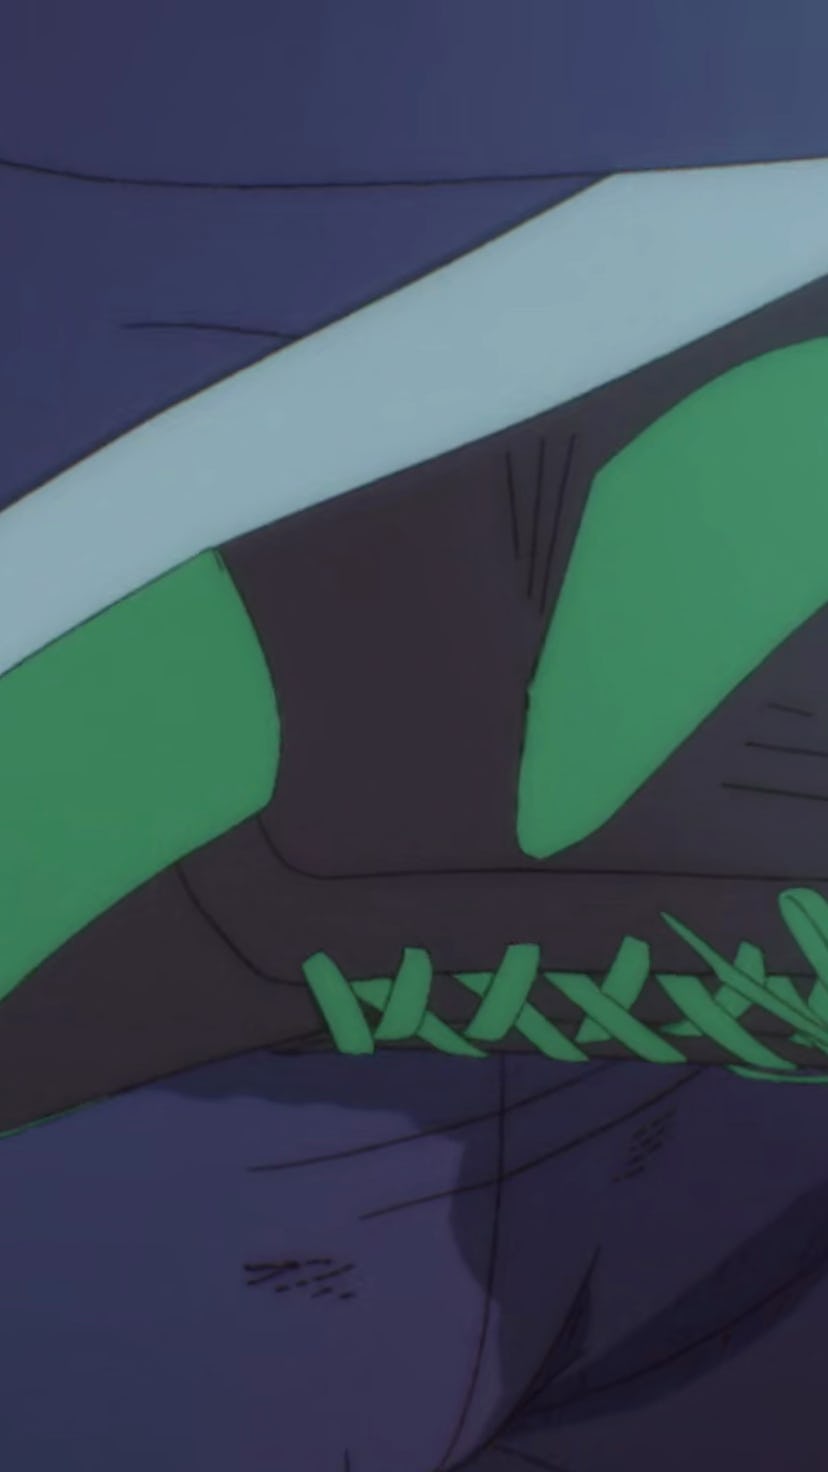 Nike-inspired sneakers in the Netflix anime series 'Dorohedoro'.